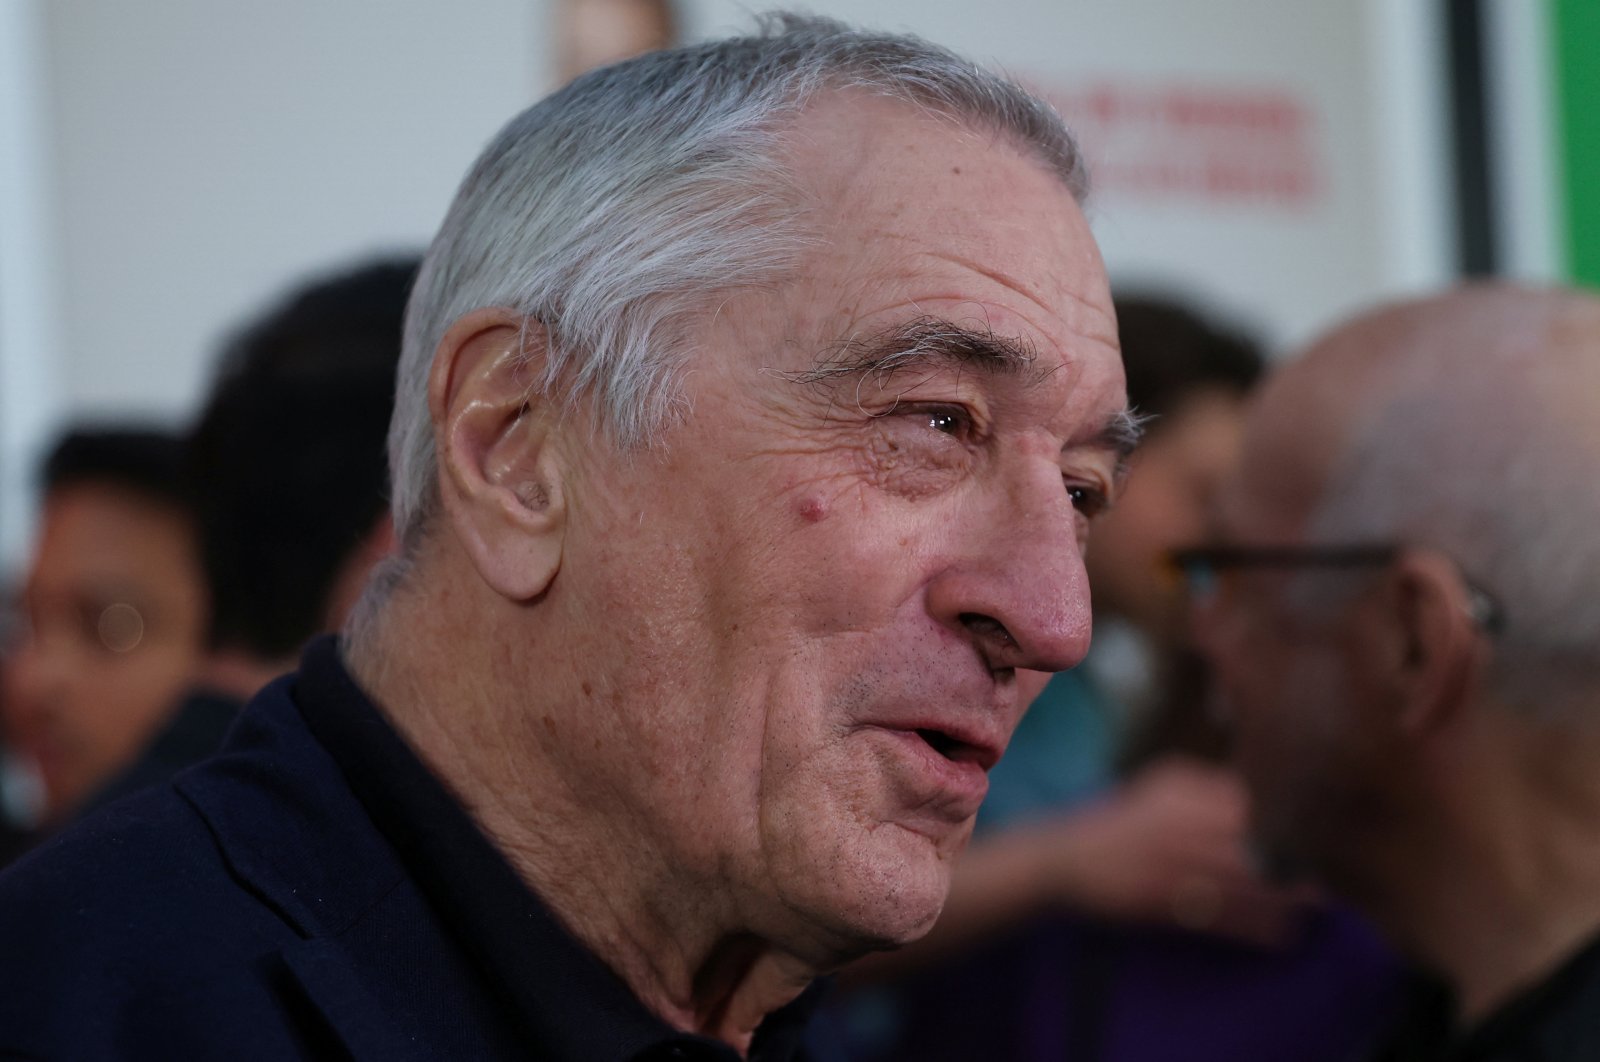 Robert De Niro speaks with media on the red carpet during the premiere of his film &quot;About My Father&quot; in New York City, U.S., May 9, 2023. (Reuters Photo)